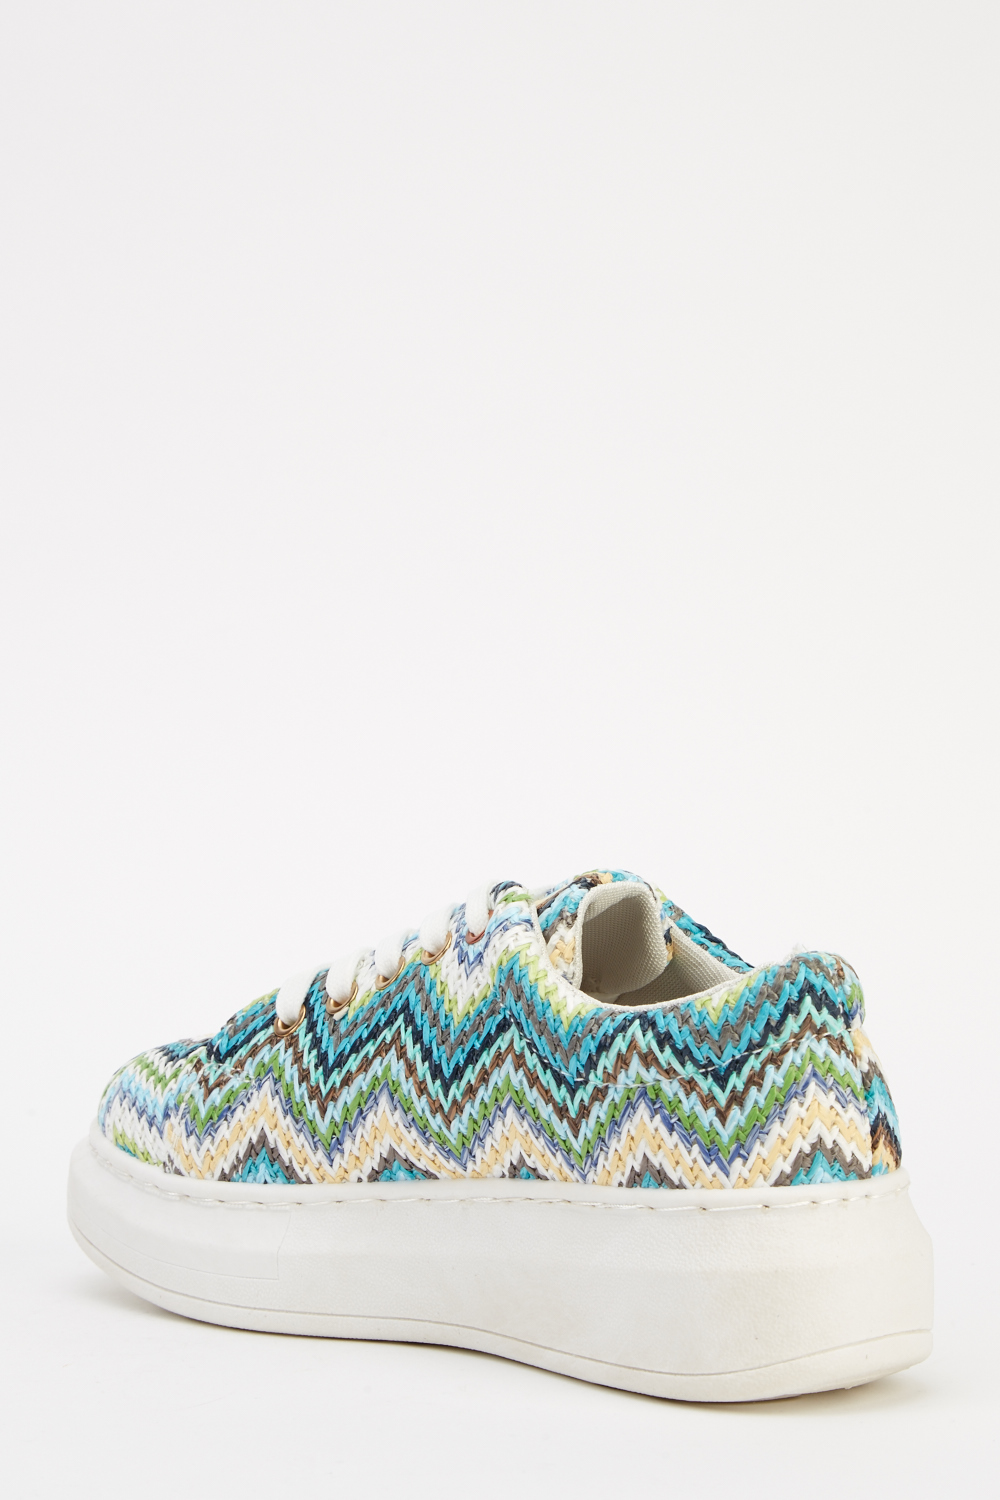 Zig Zag Lace Up Woven Shoes 4 Colours Just £5